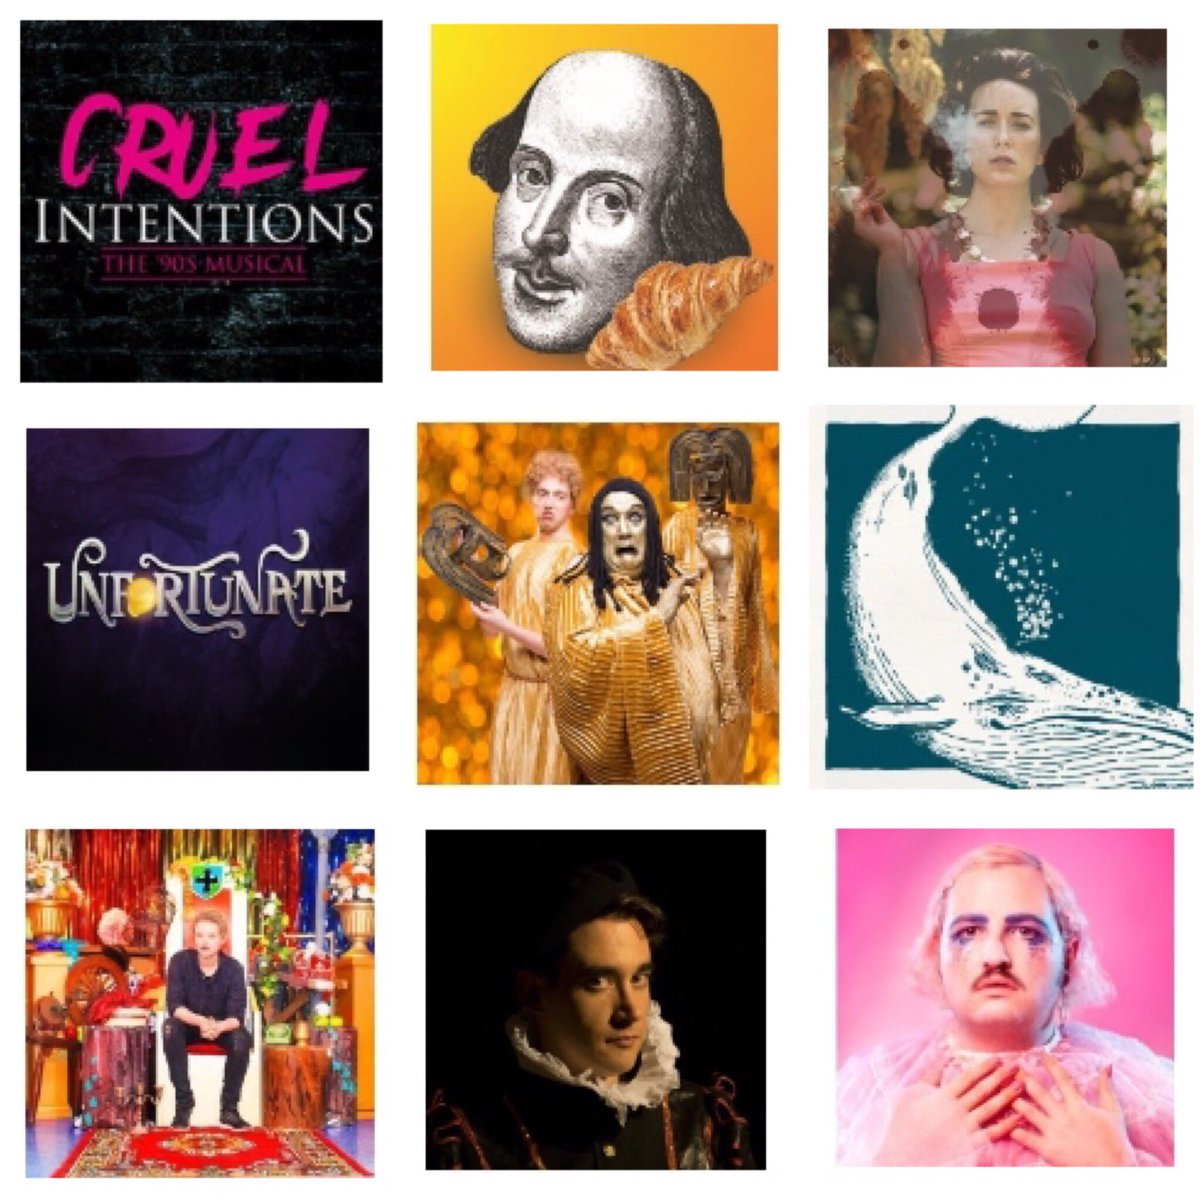 I’ve had a marvellous morning in bed eating sausage rolls and soreadsheeting my @EdFringe. Particularly looking forward to @CruelMusicalUK, #ThePatientGloria, #UnfortunateMusical, #IslanderMusical, #IAmDram, #Elizabethan and the ever-brilliant @Shake4Break. #MakeYourFringe